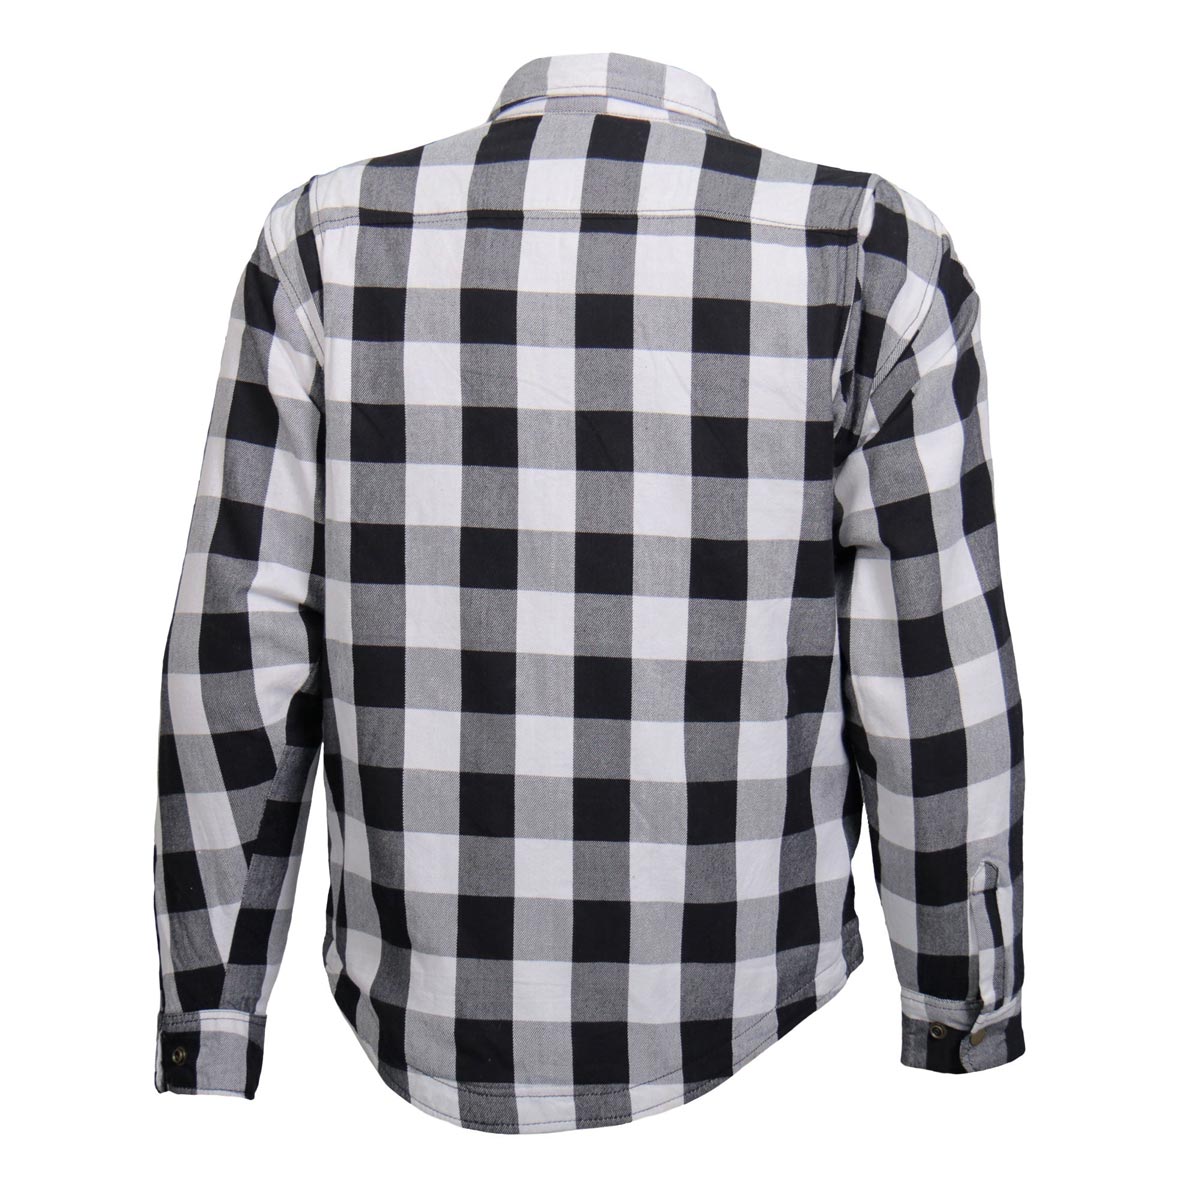 Hot Leathers JKM3005 Men's White and Black Armored Flannel Jacket